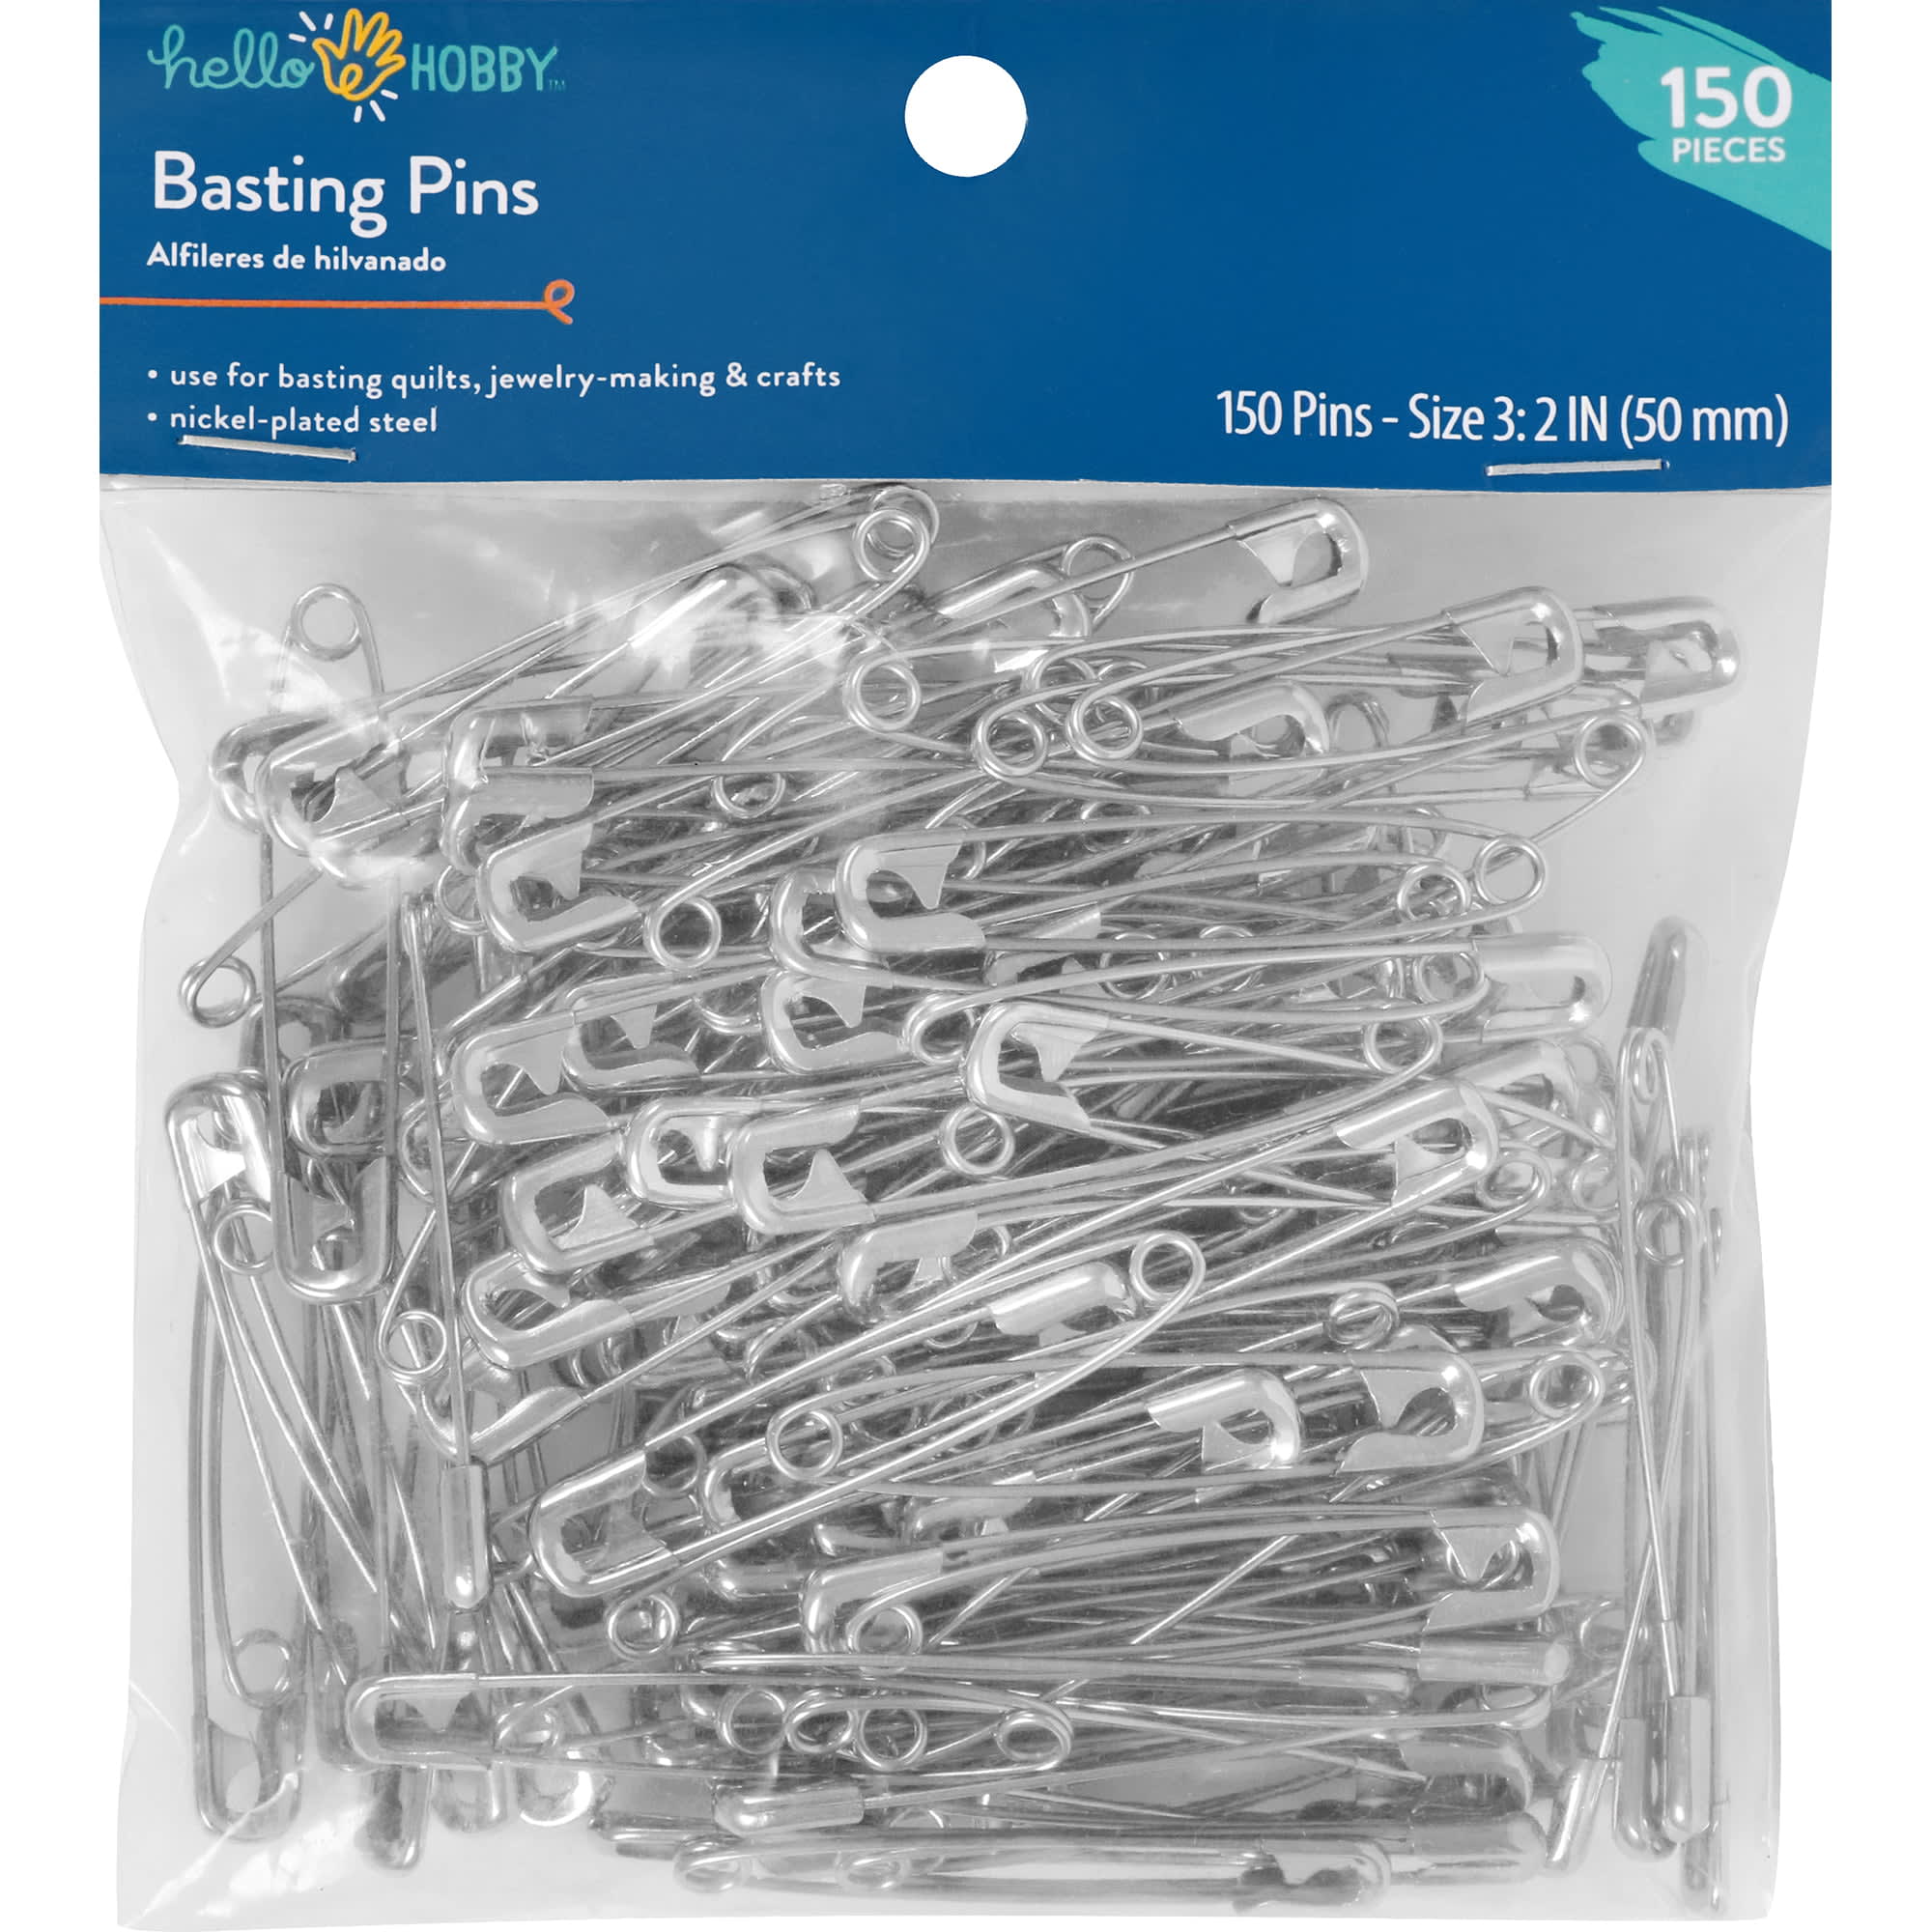 Assorted Safety Pins, Hobby Lobby